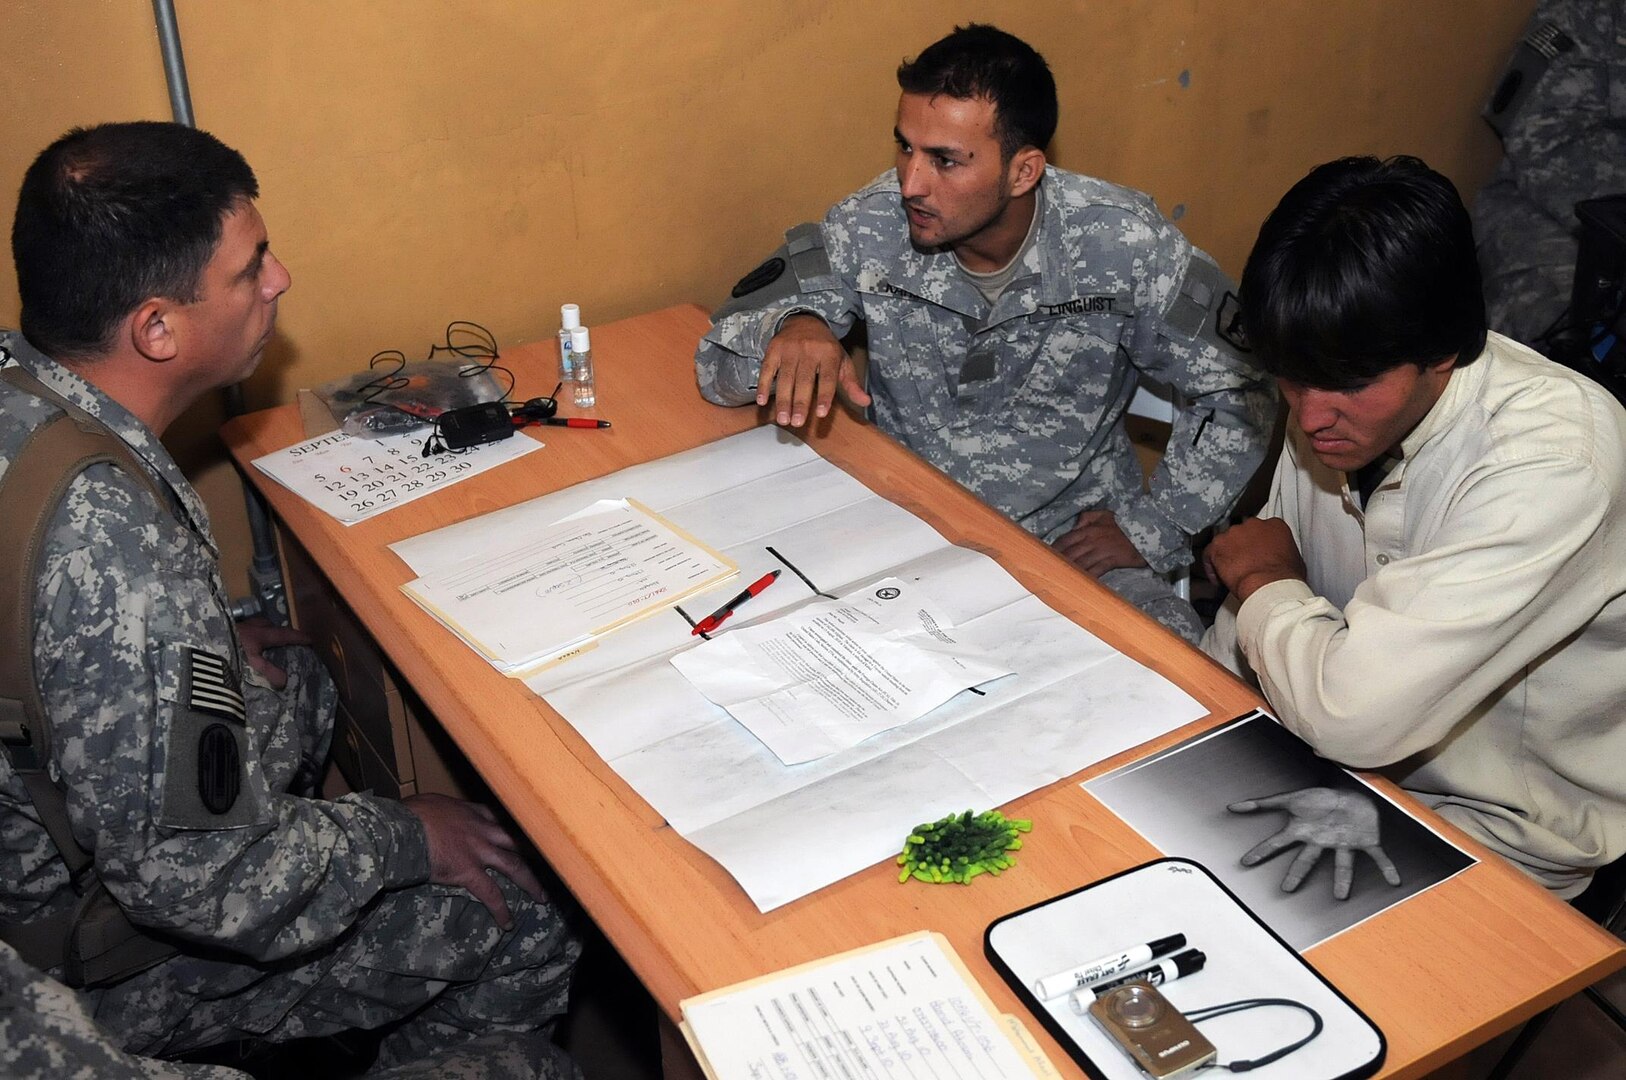 Lt. Col. Donald McCarty, left, deputy staff judge advocate for the 196th Maneuver Enhancement Brigade of the South Dakota Army National Guard listens as Rahim, center, a linguist for the 196th, explains a claim made by Naqeb, right, a local Afghan citizen. McCarty helps local Afghans file claims against the U.S. military when any incident, such as a car accident happens.